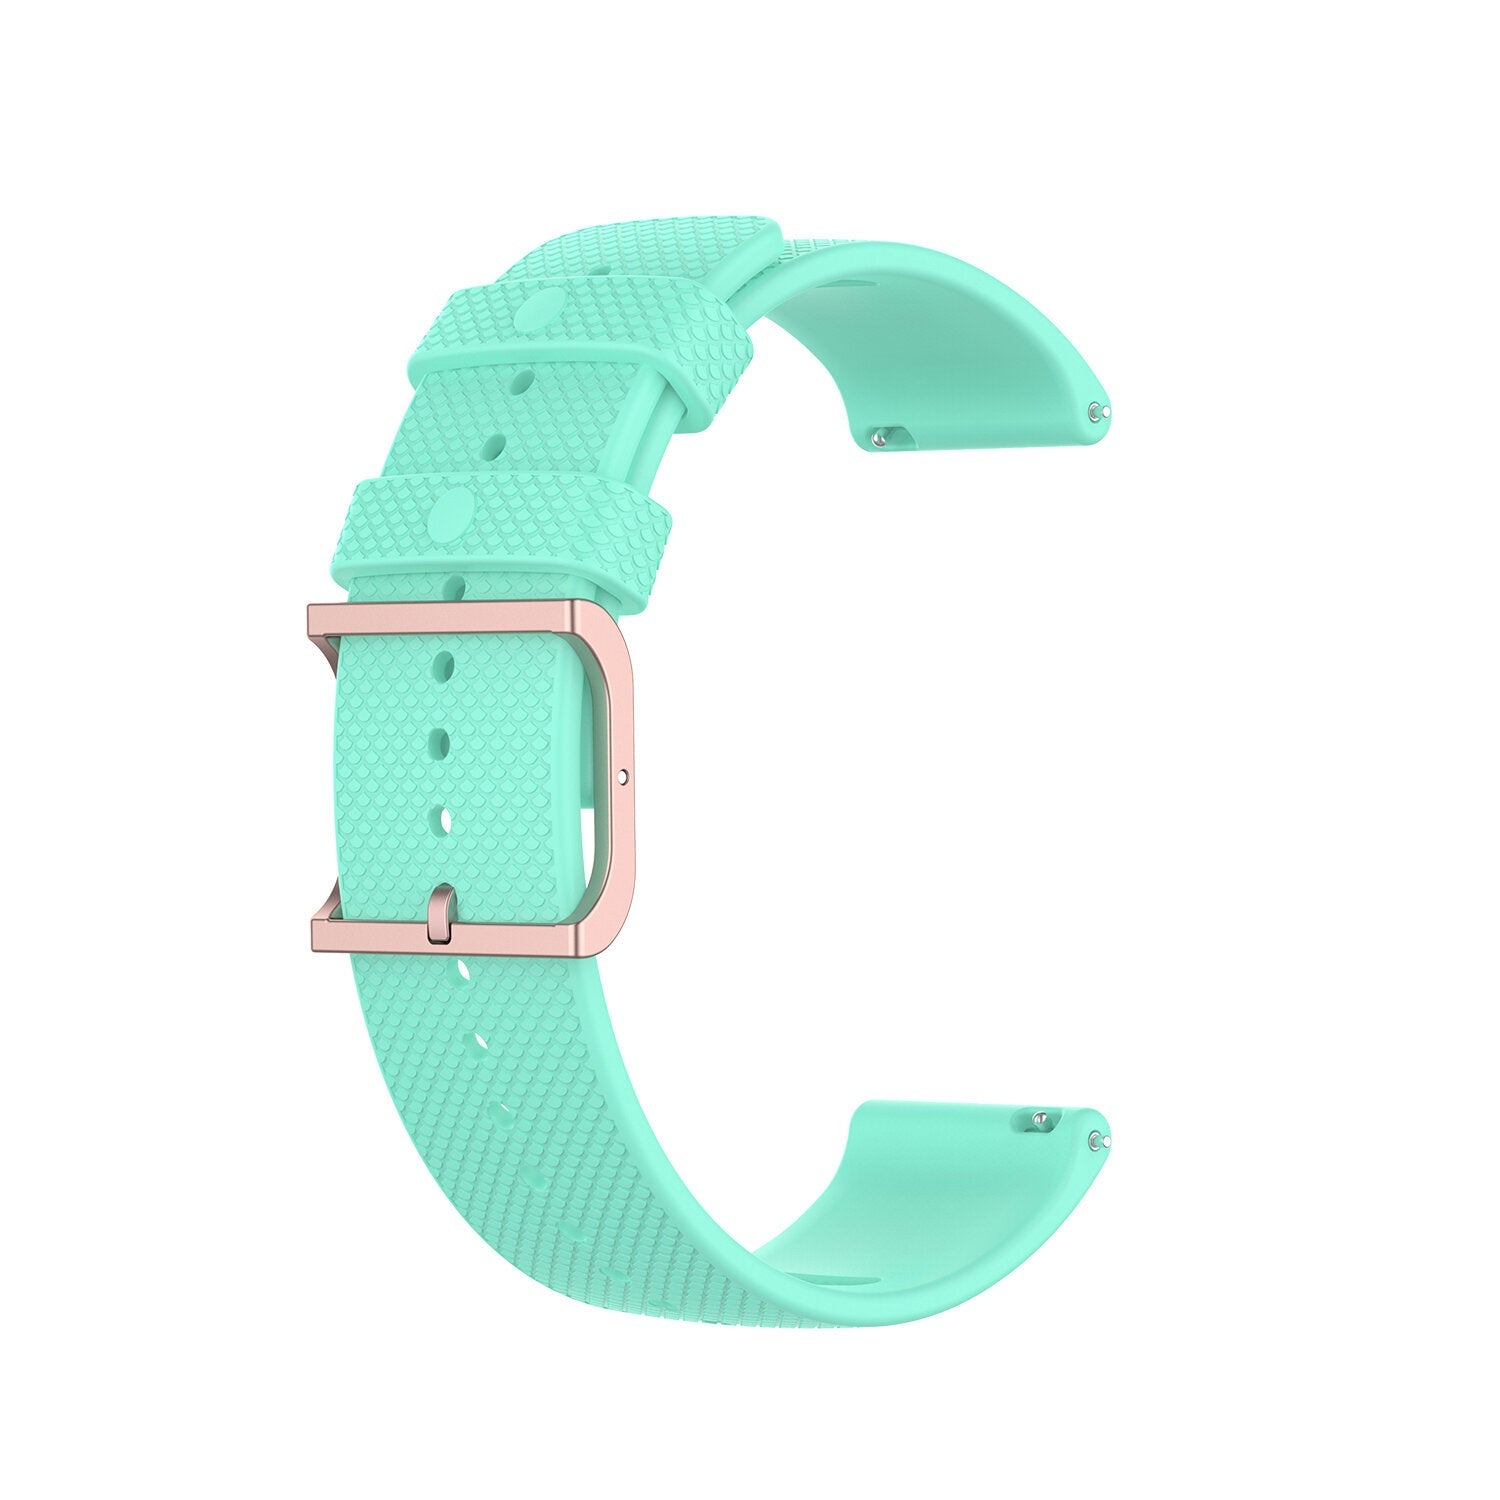 20mm Dot Pattern Silicone Smart Watch Band Replacement Strap